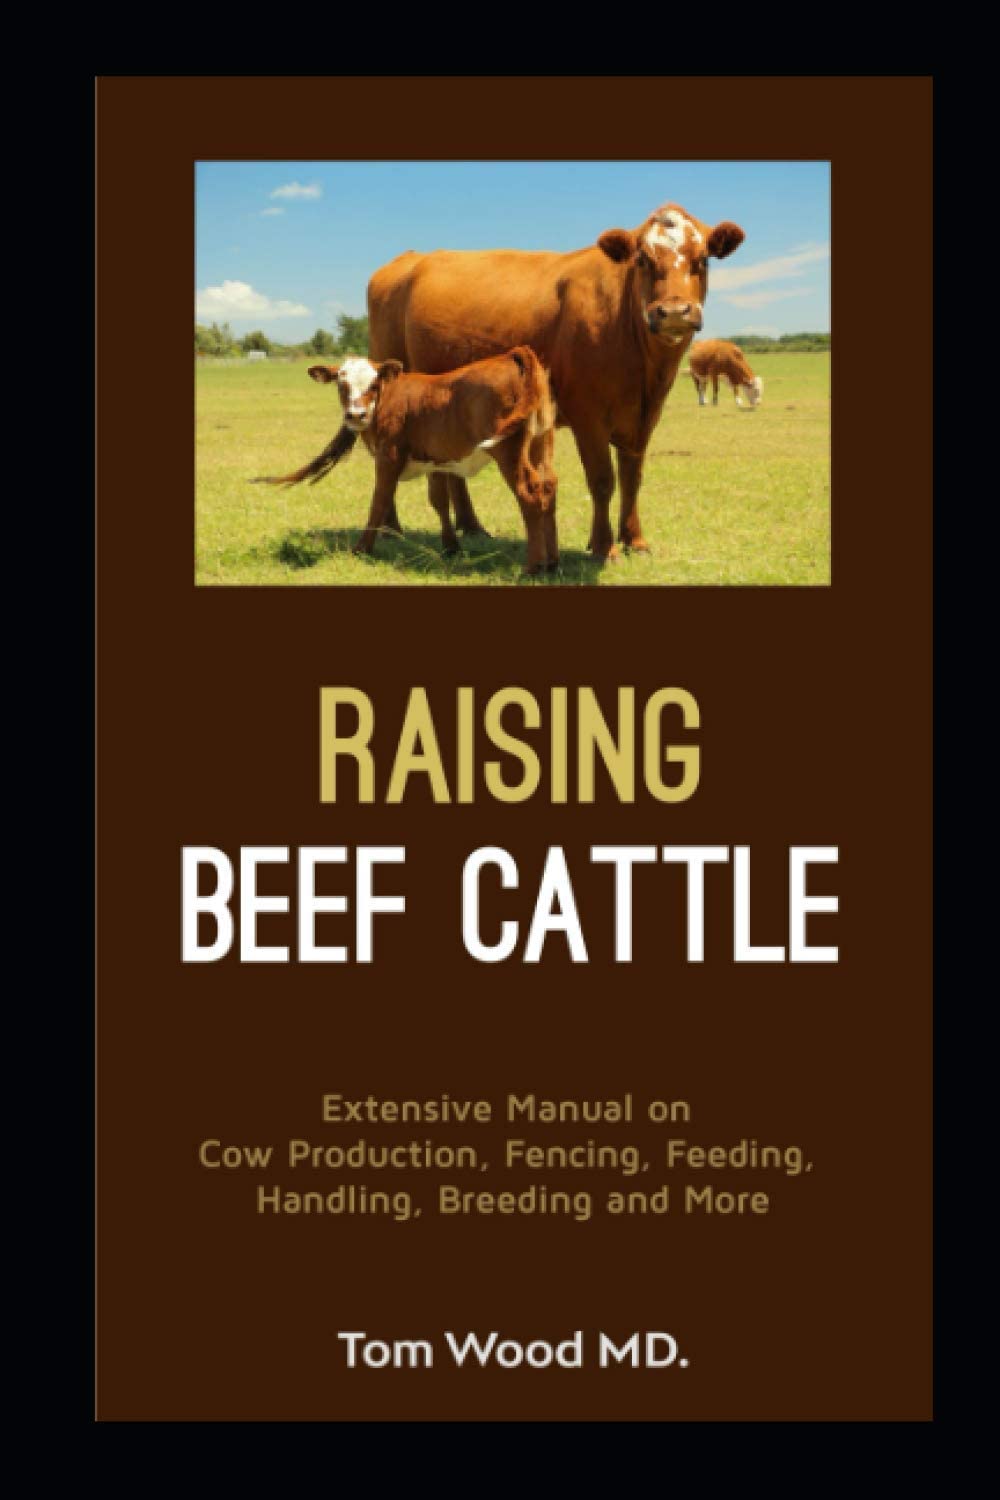 Raising Beef Cattle: Extensive Manual on Cow Production, Fencing, Feeding, Handling, Breeding and more